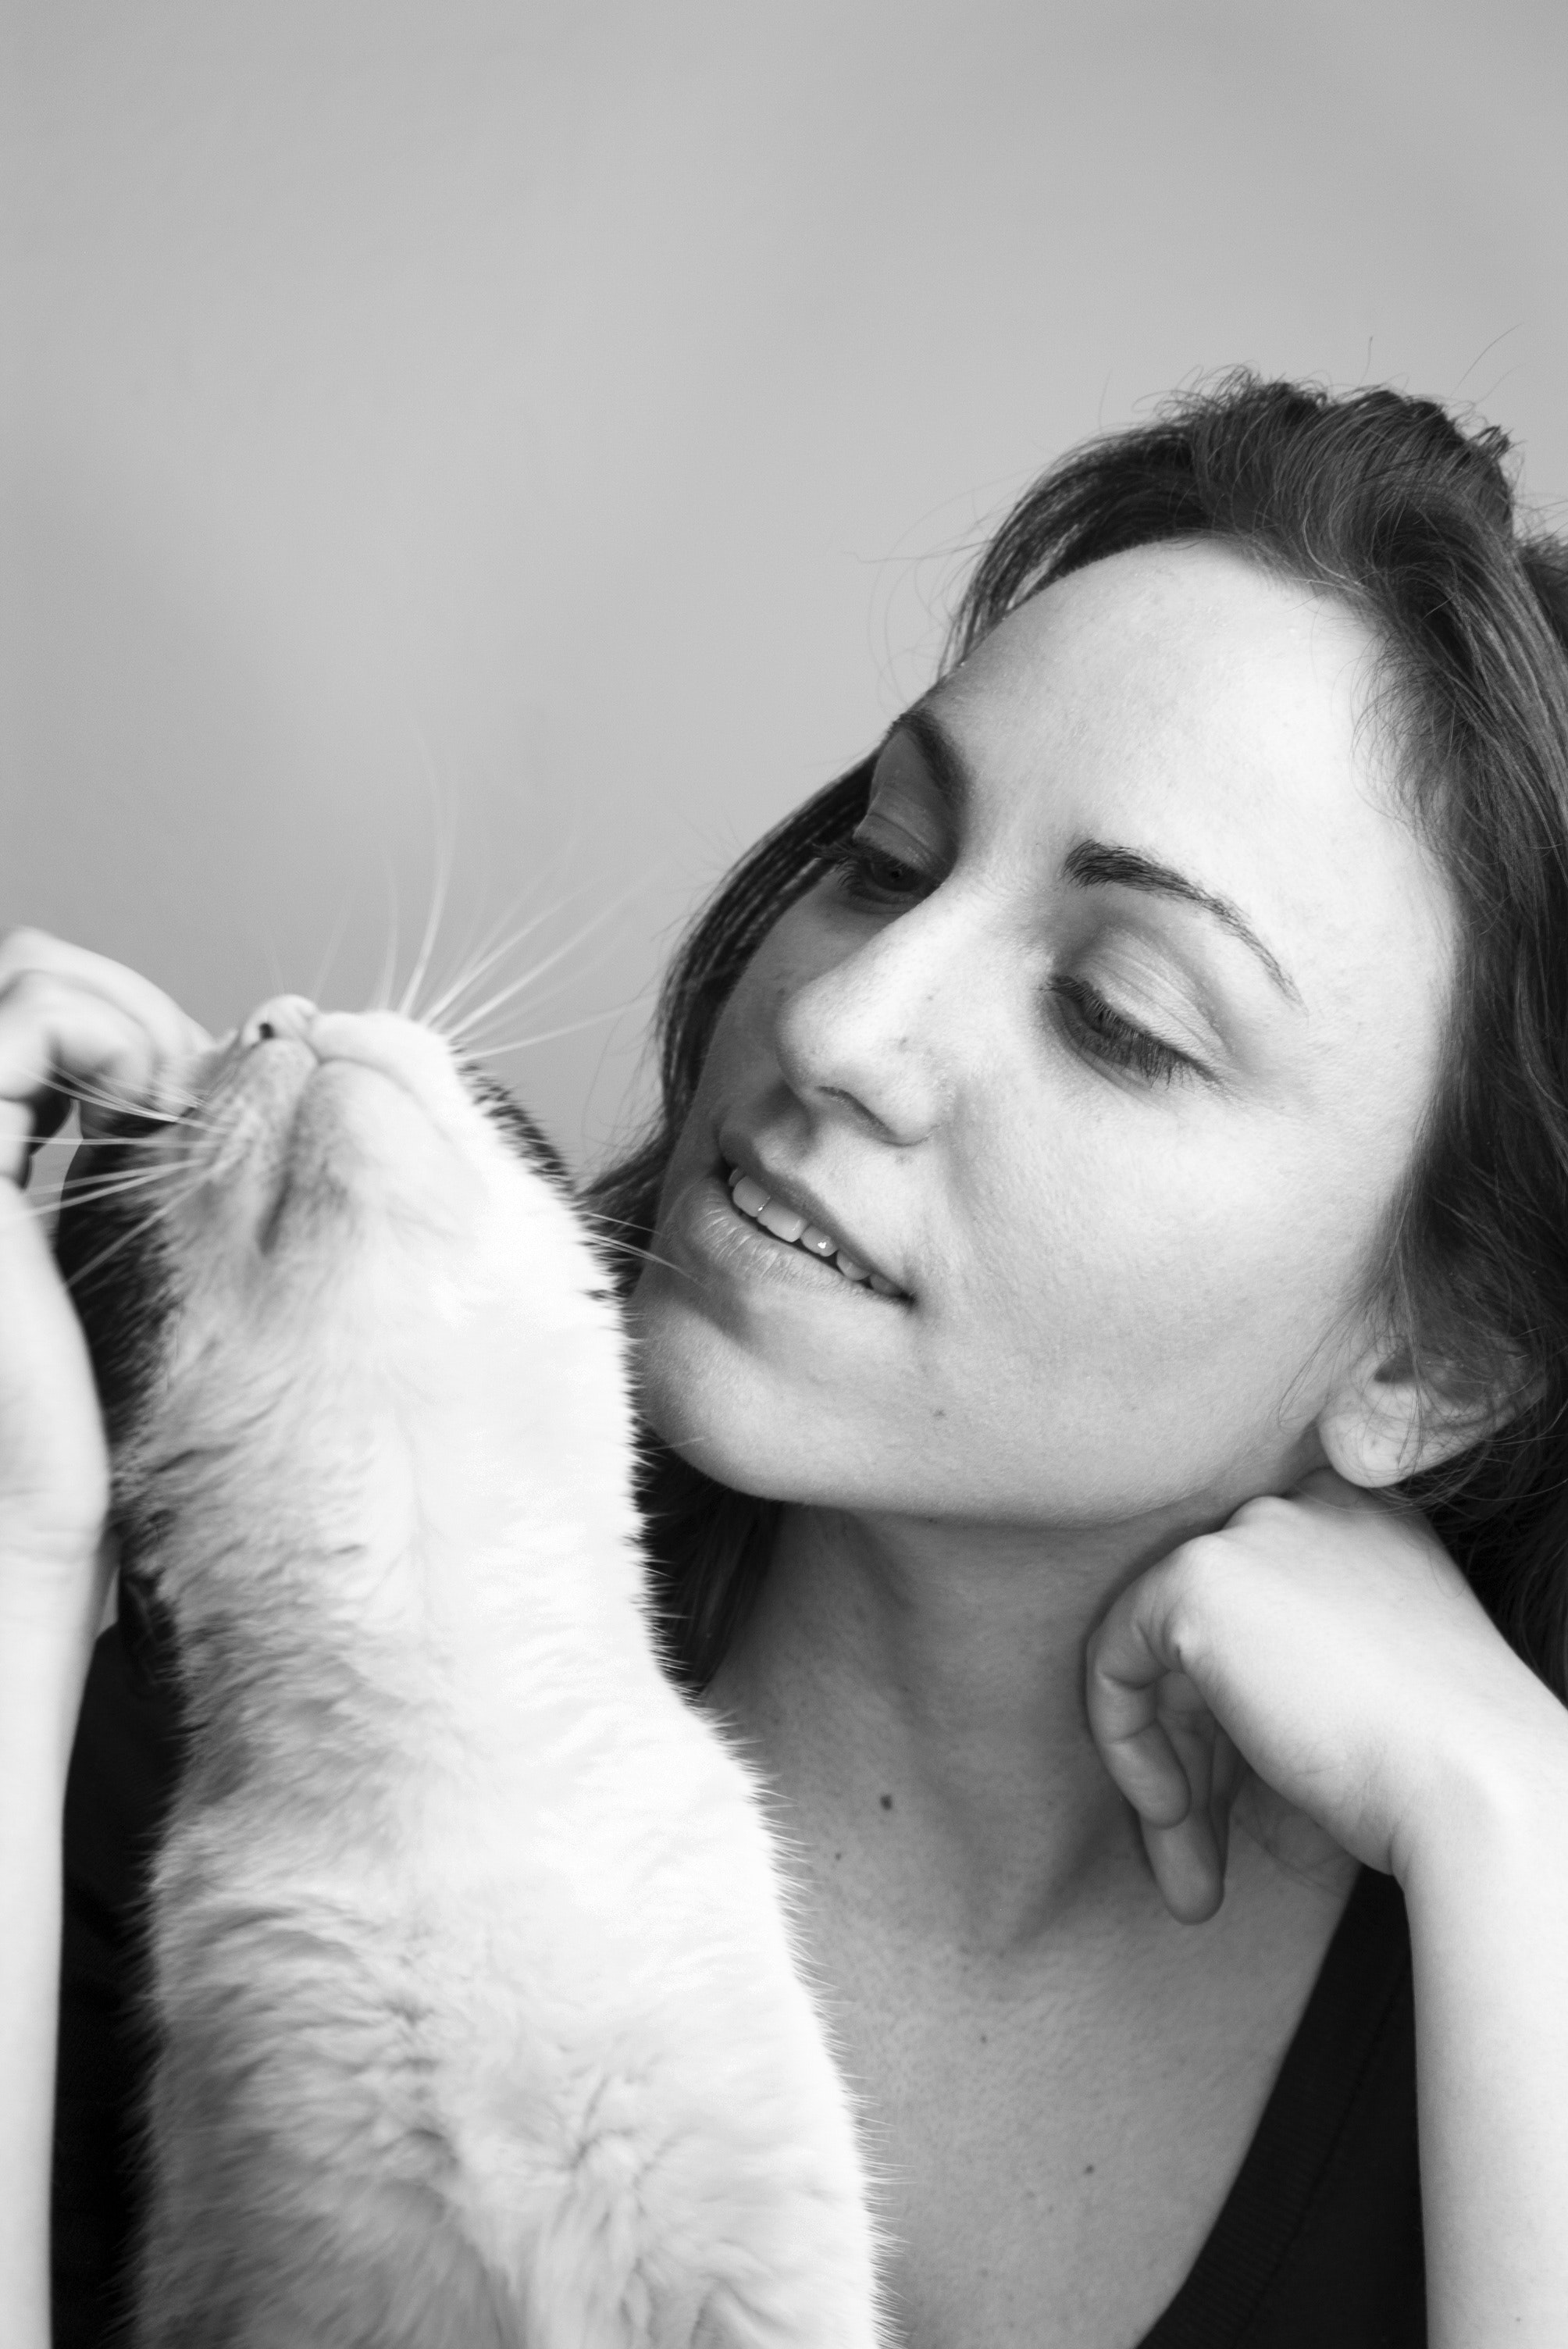 Grayscale Photo of Woman and Cat, Animal, Love, Smile, Pussycat, HQ Photo